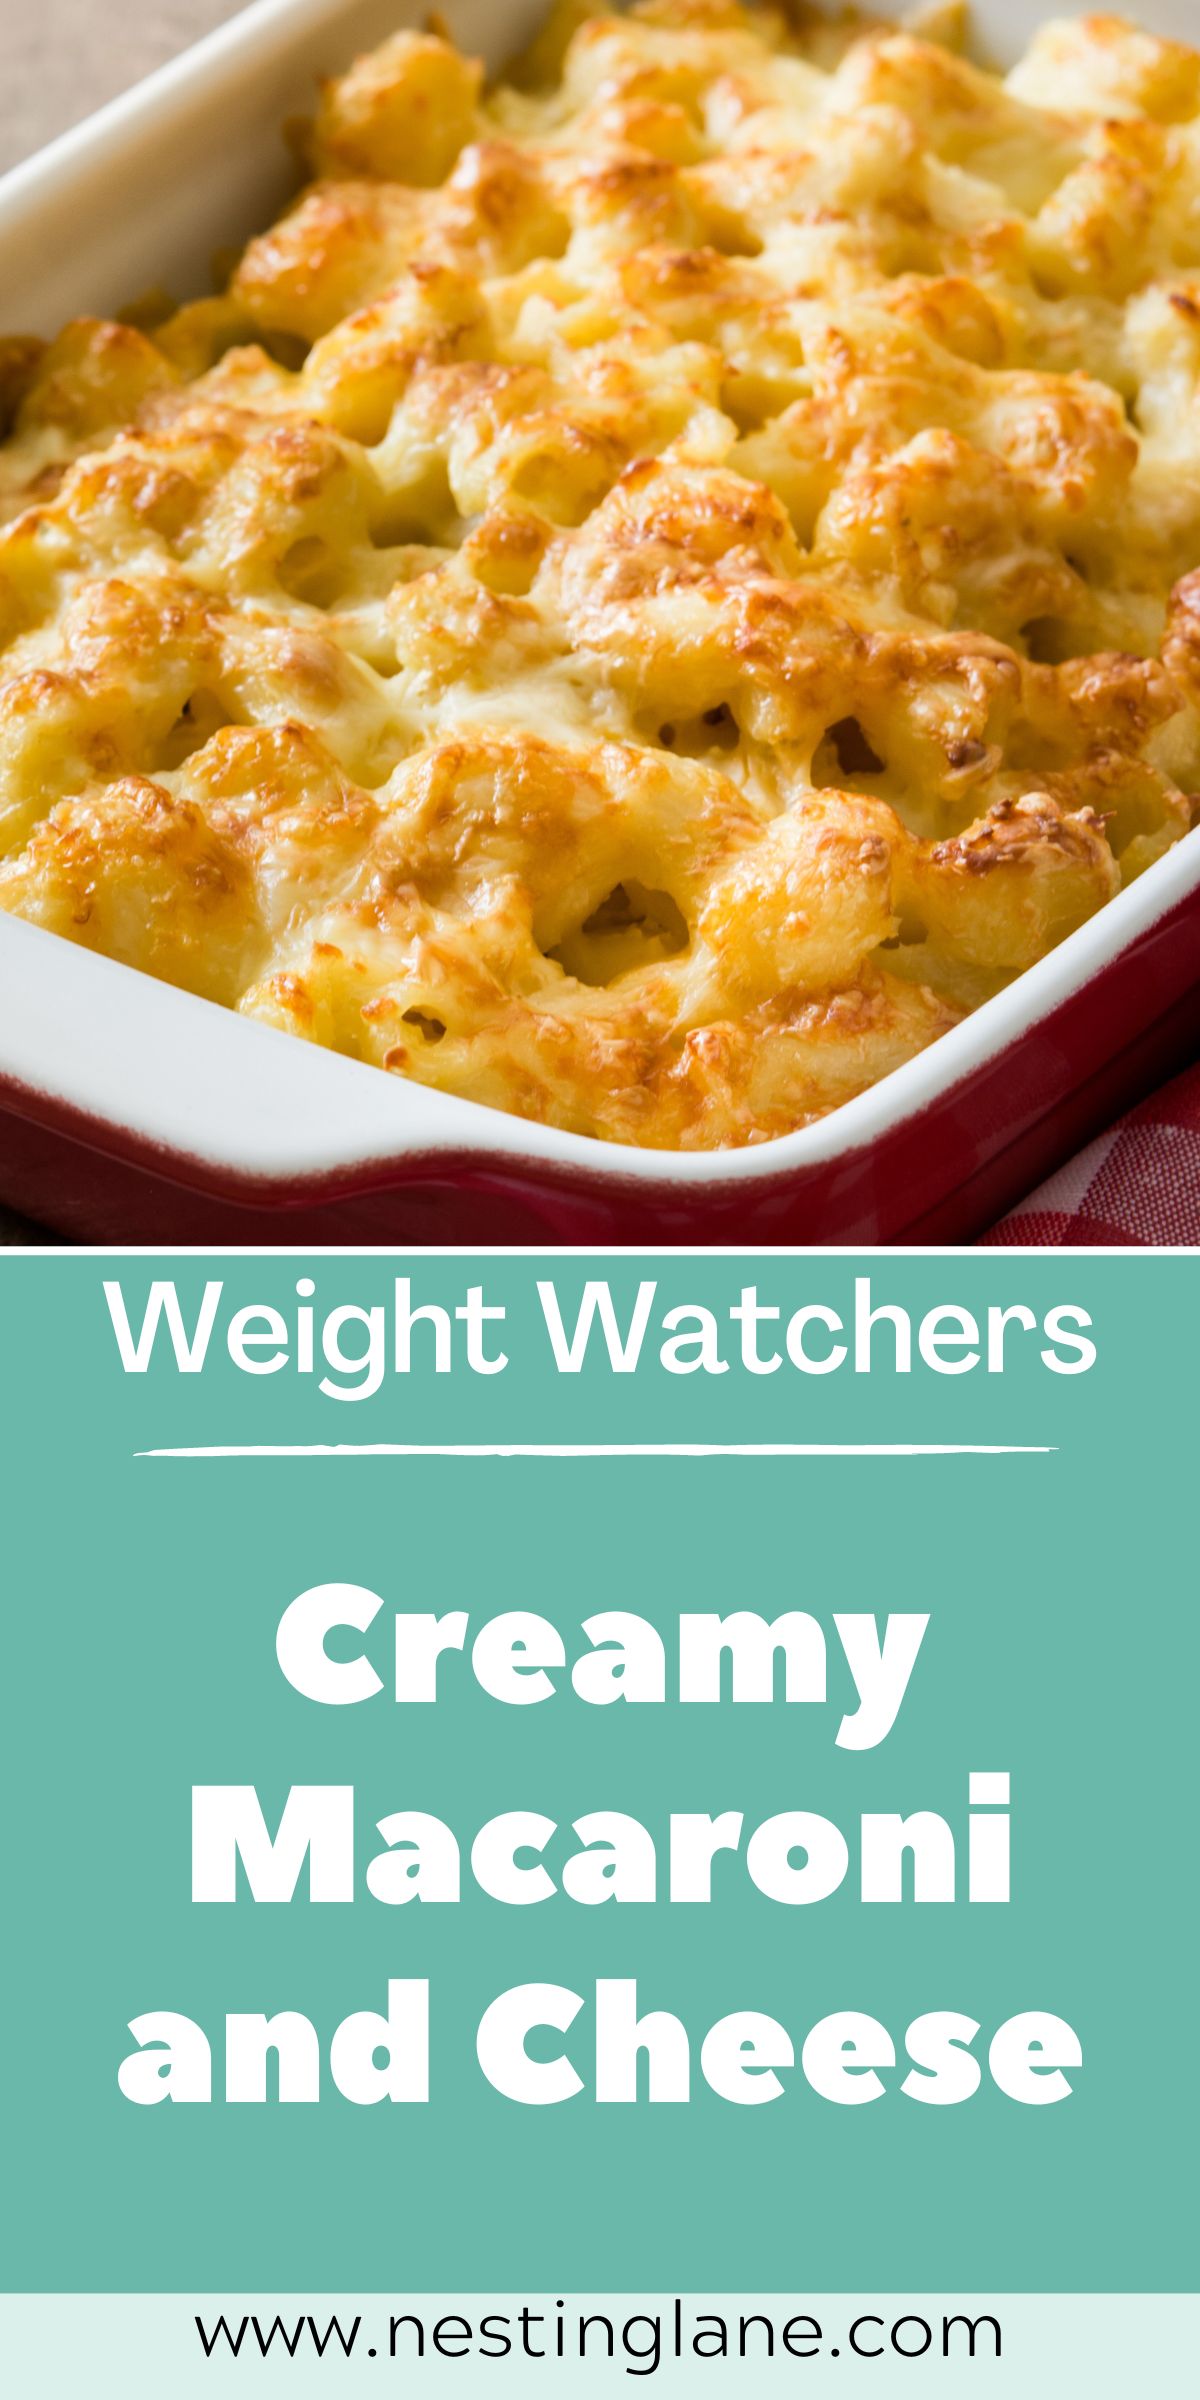 Graphic for Pinterest of Weight Watchers Creamy Macaroni and Cheese Recipe